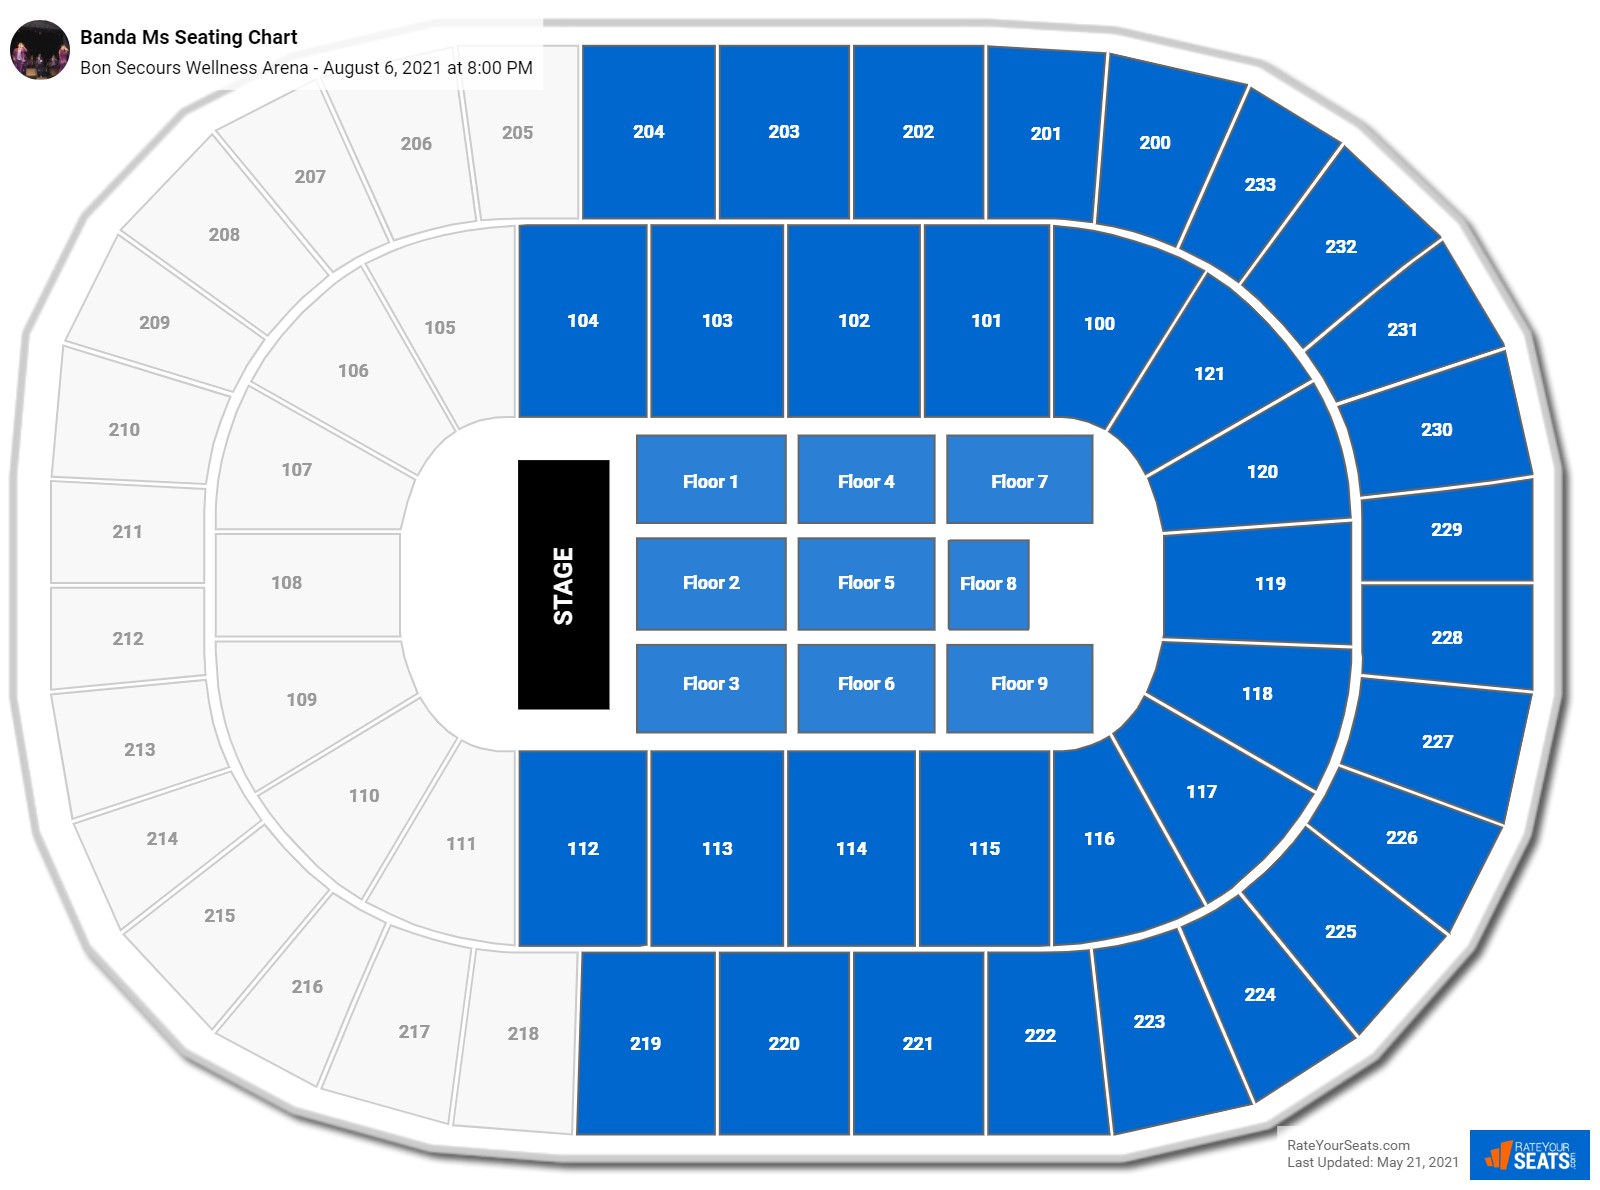 Bon Secours Wellness Arena Seating Charts for Concerts